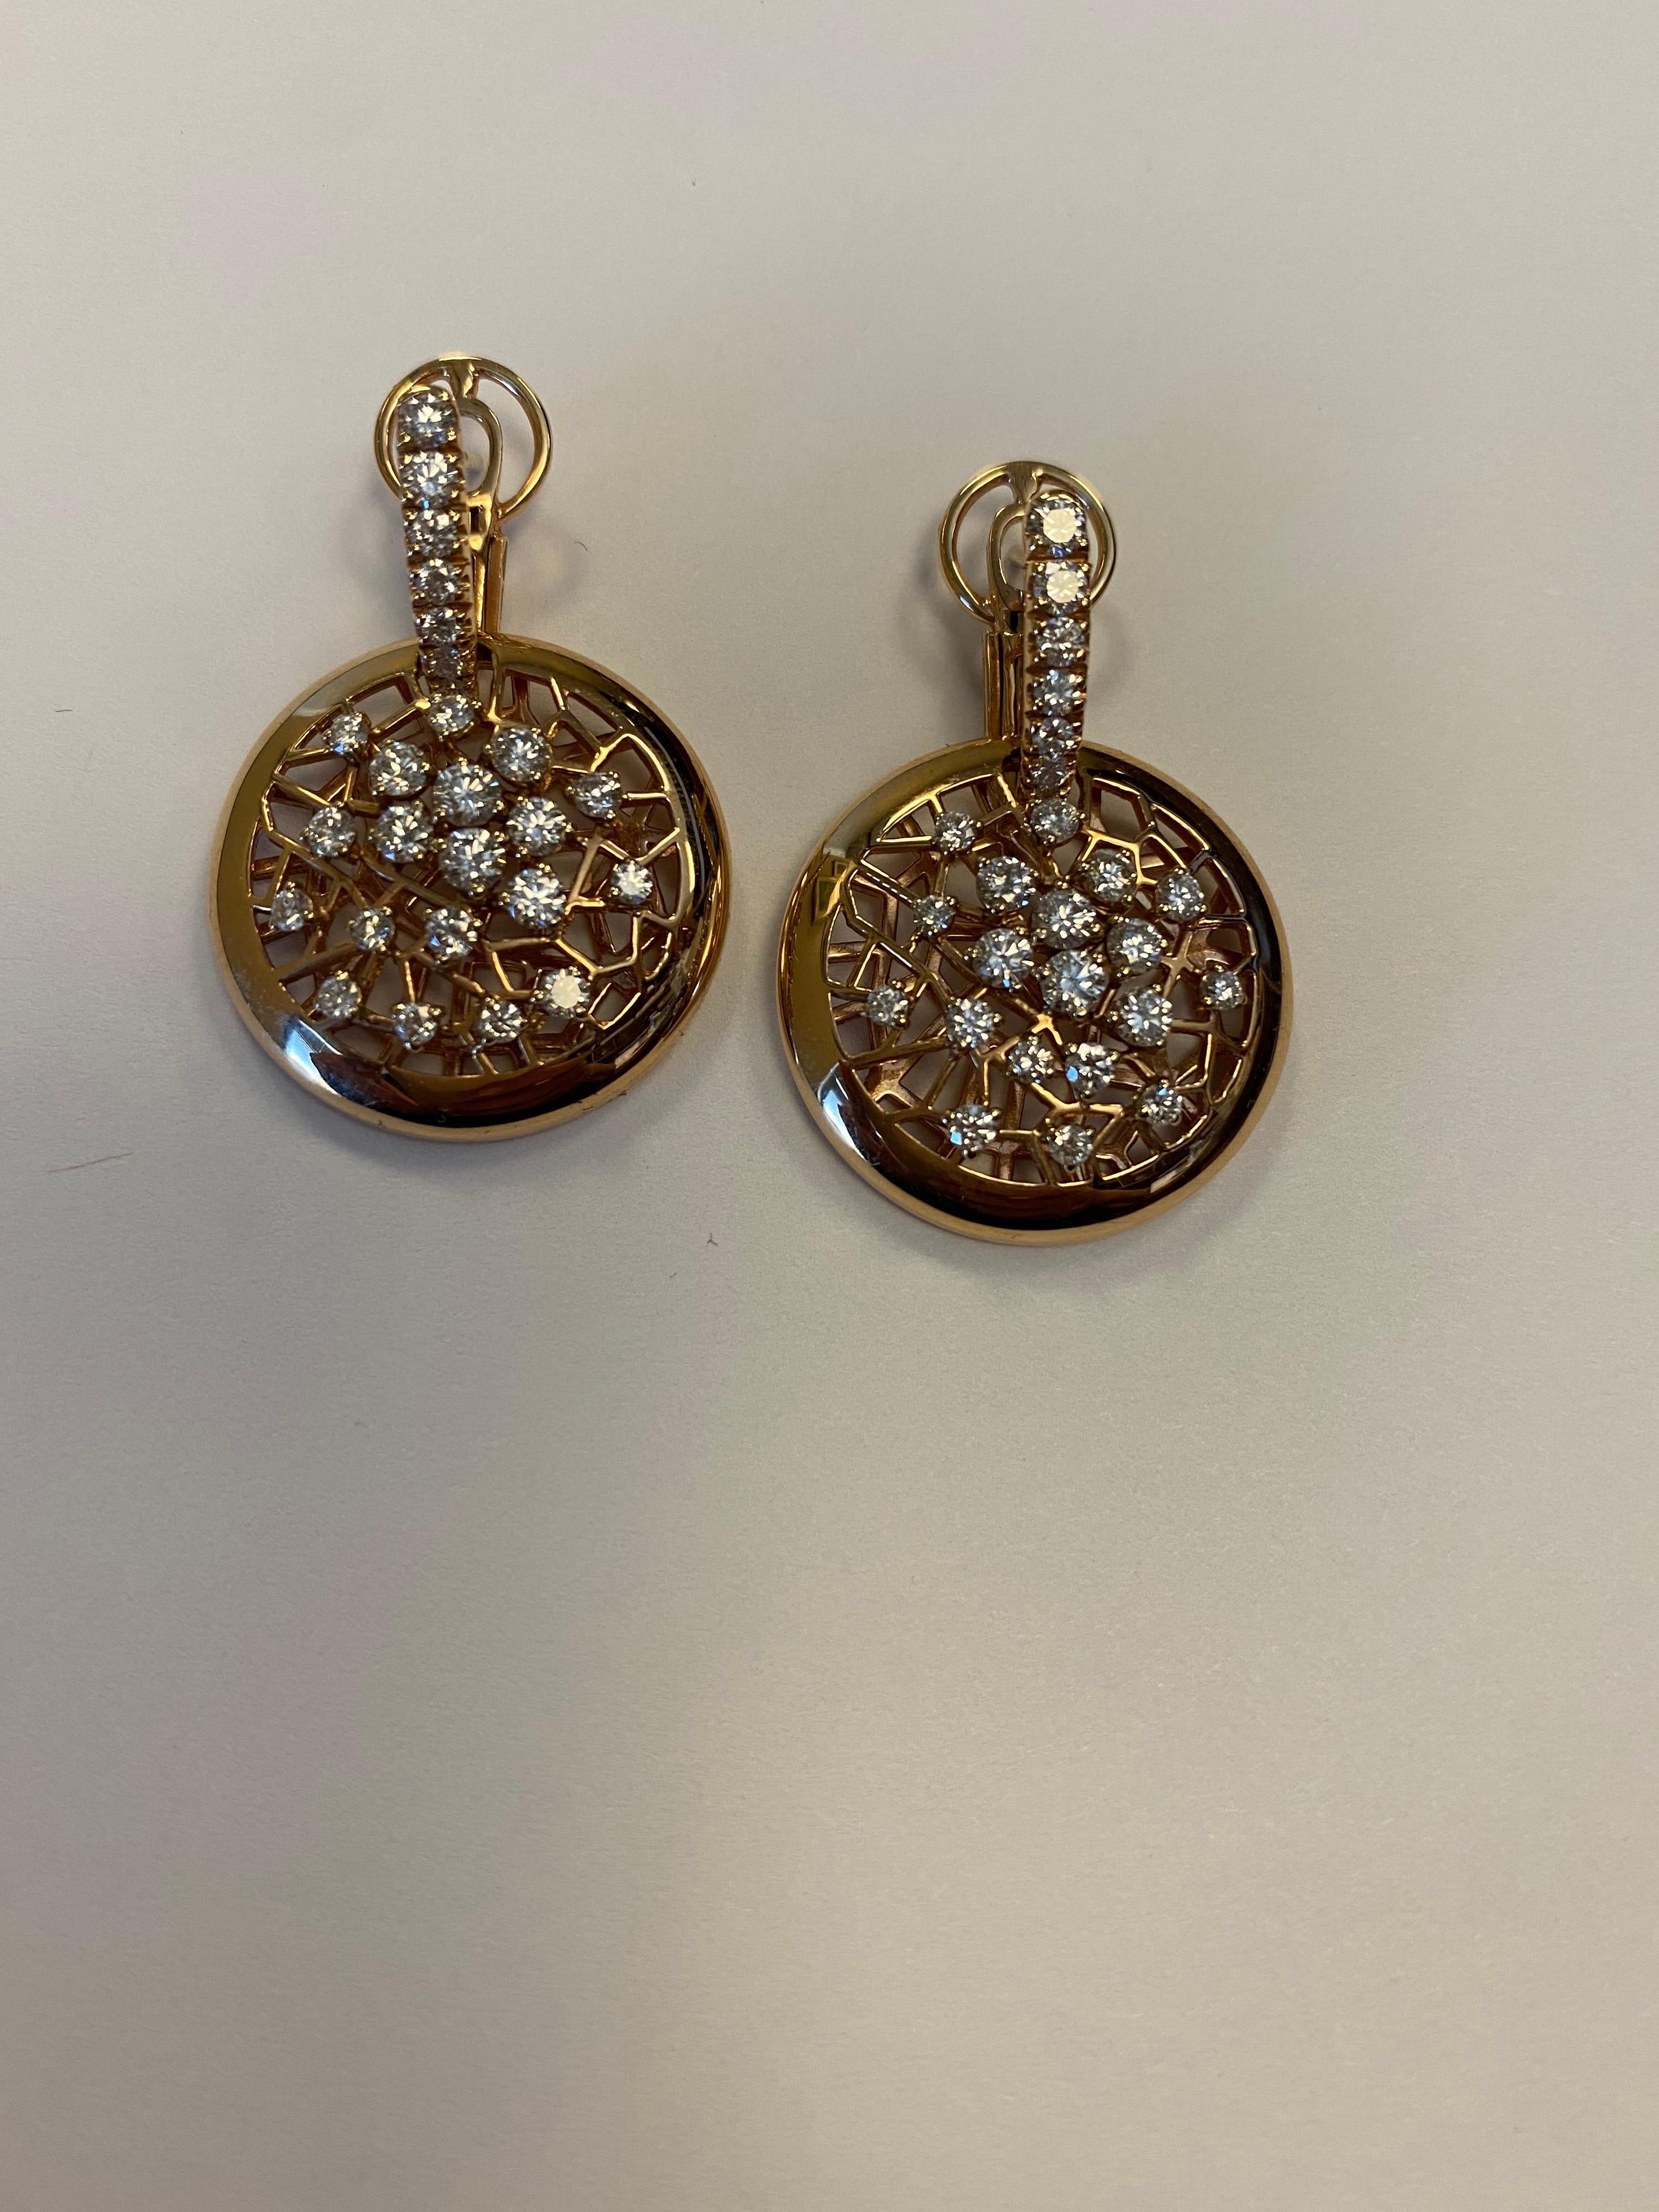 18K rose gold and diamond circular shape drop earrings with 50 full cut round diamonds weighing 1.86cts
Retail $5500